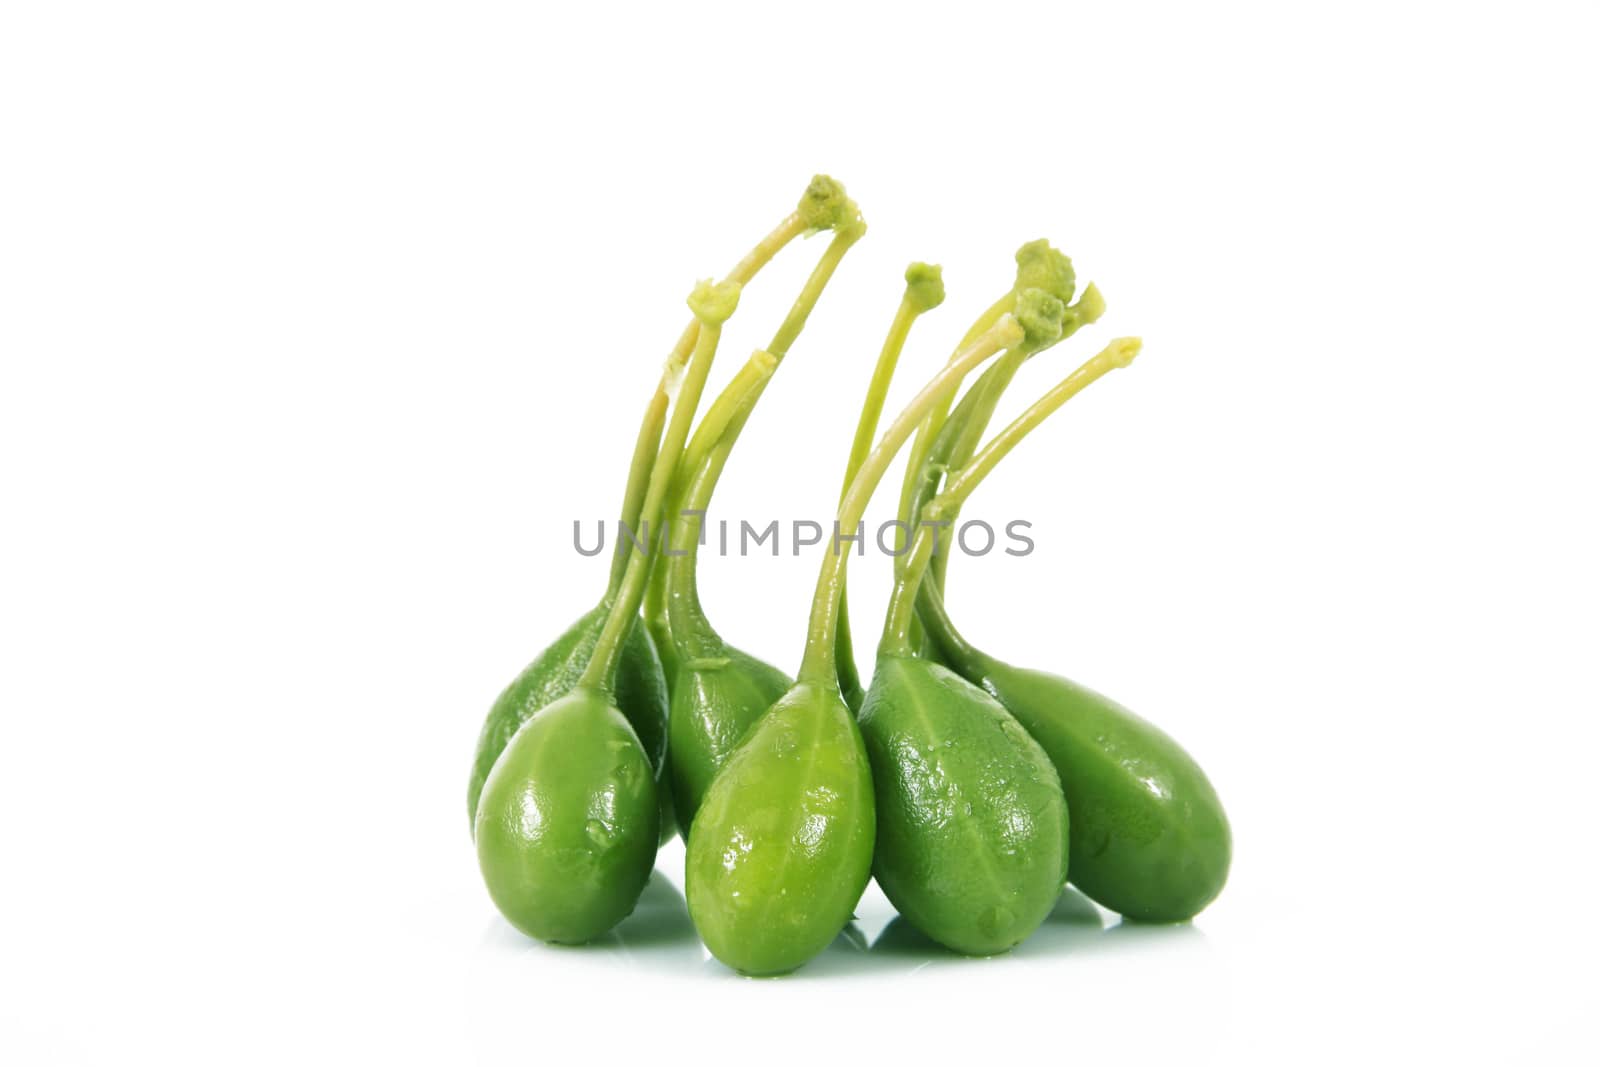 capers on white background by photobeps